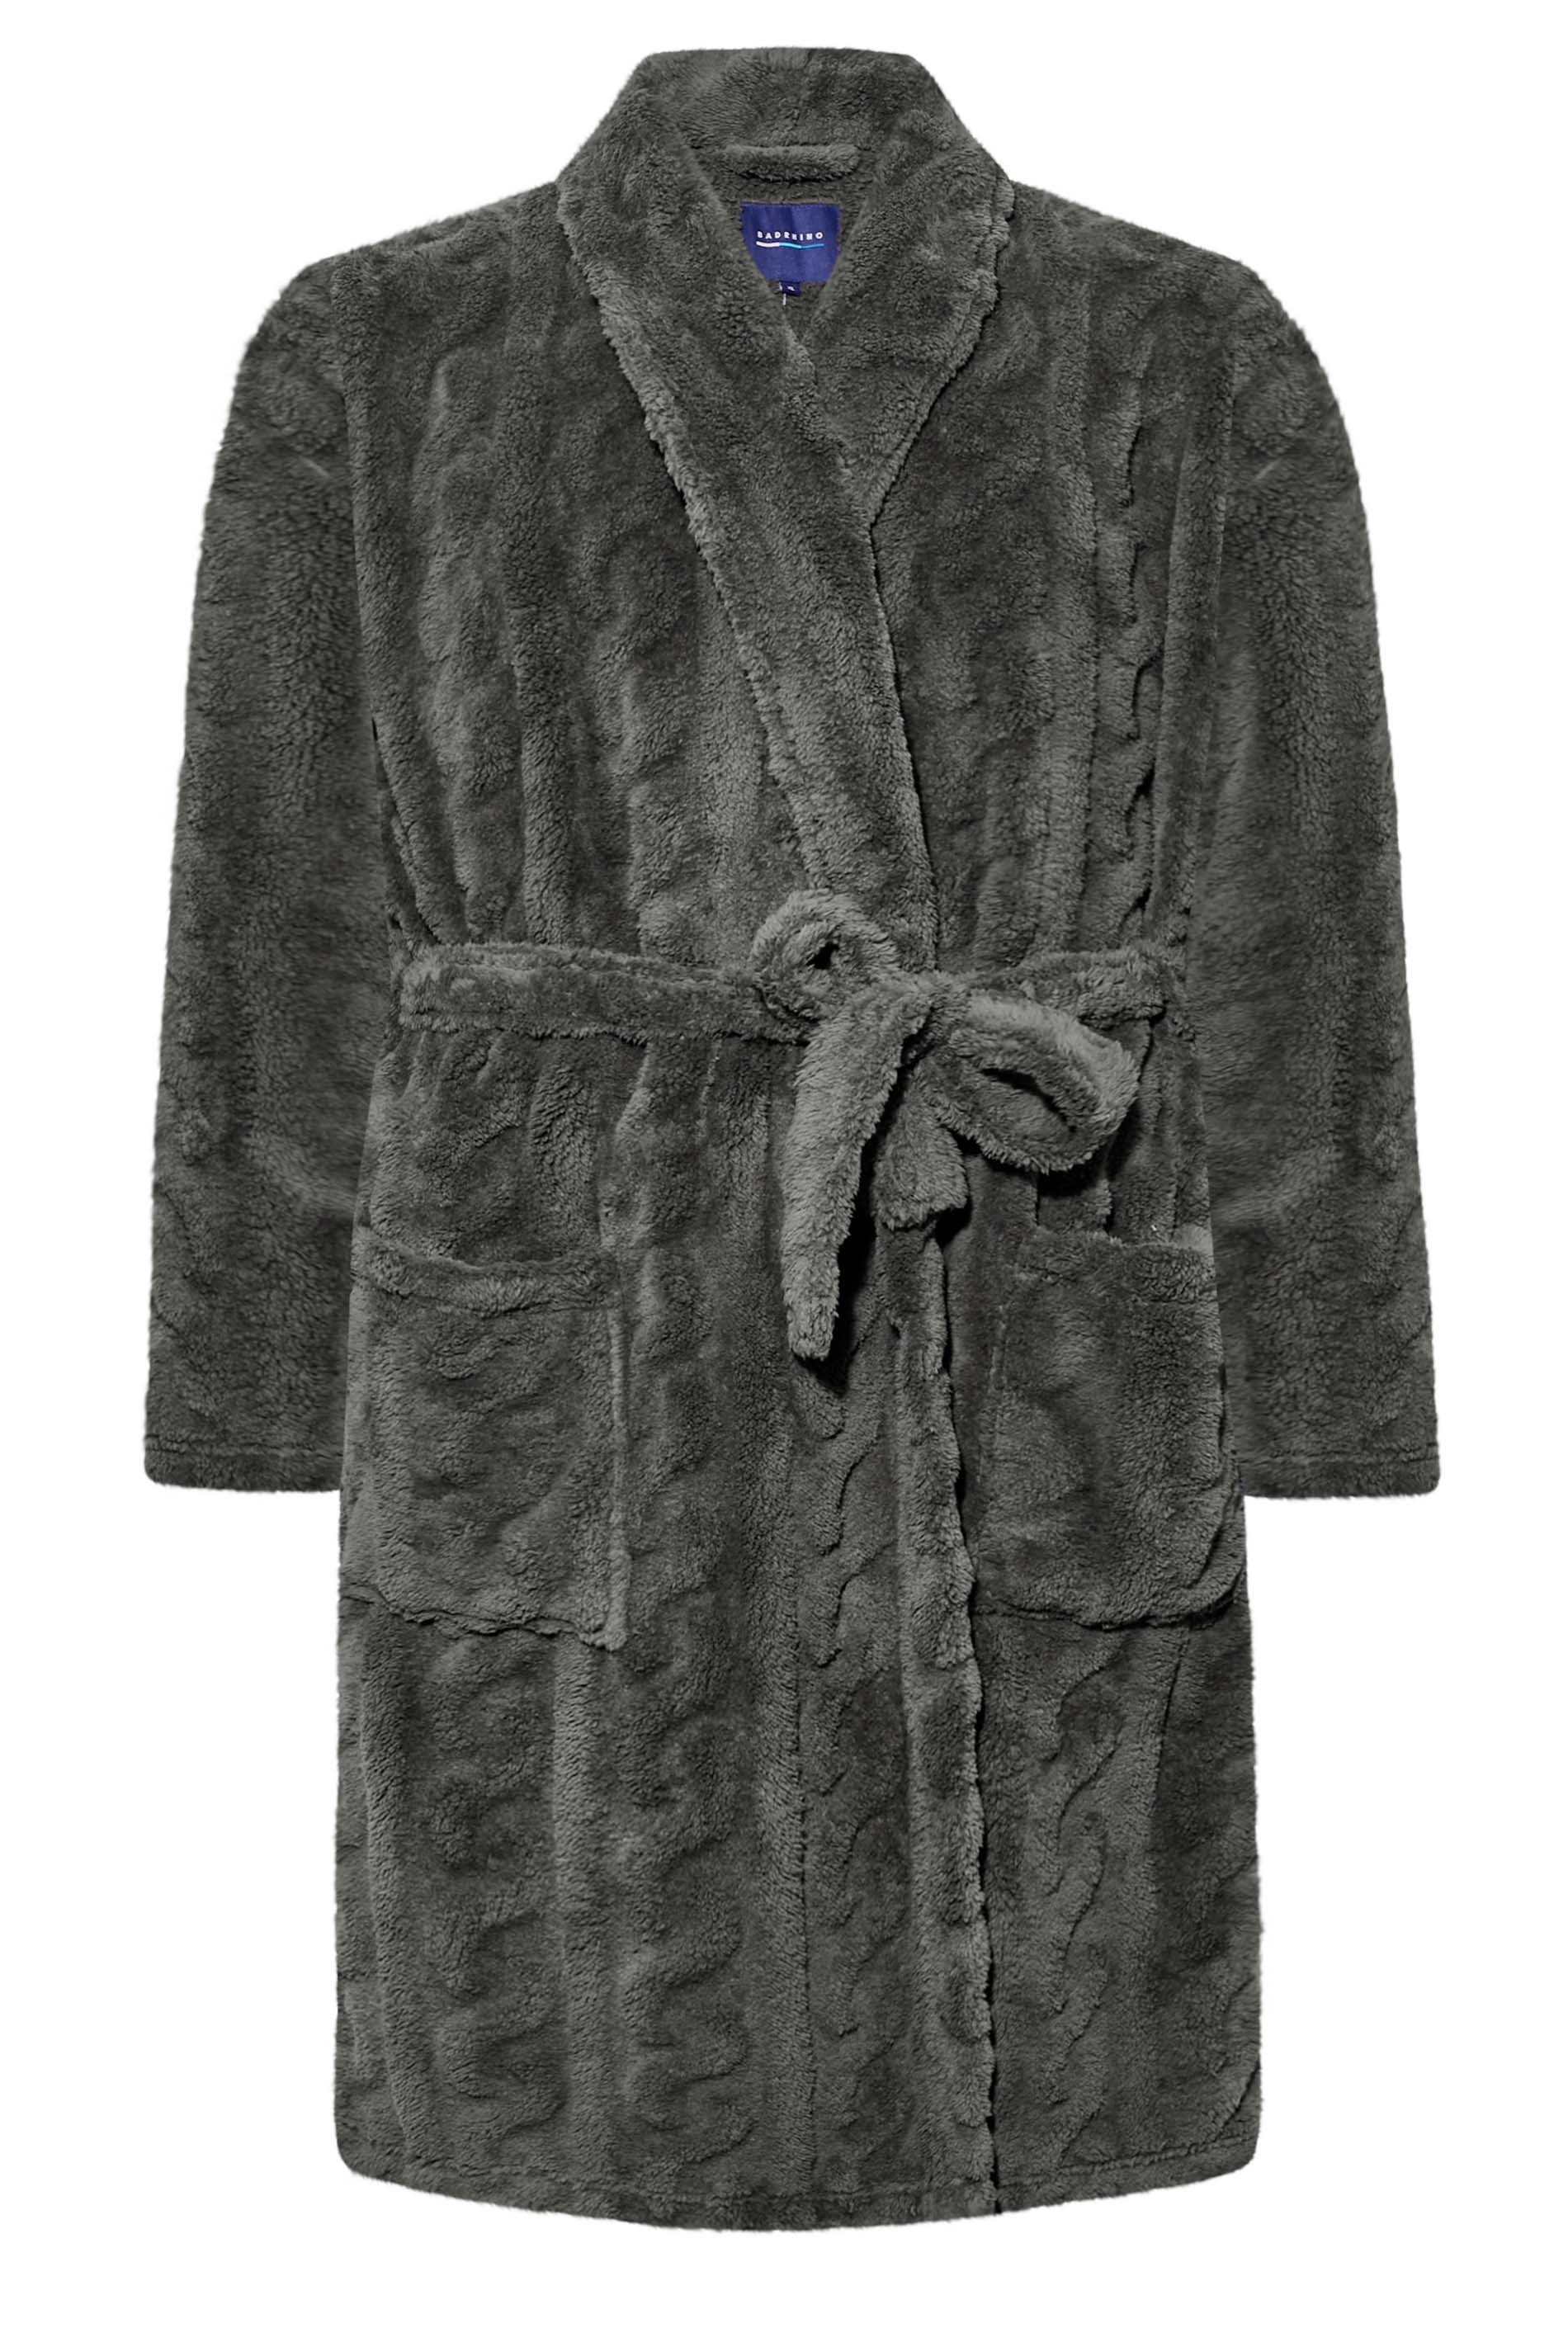 BadRhino Big & Tall Grey Cable Dressing Gown 1